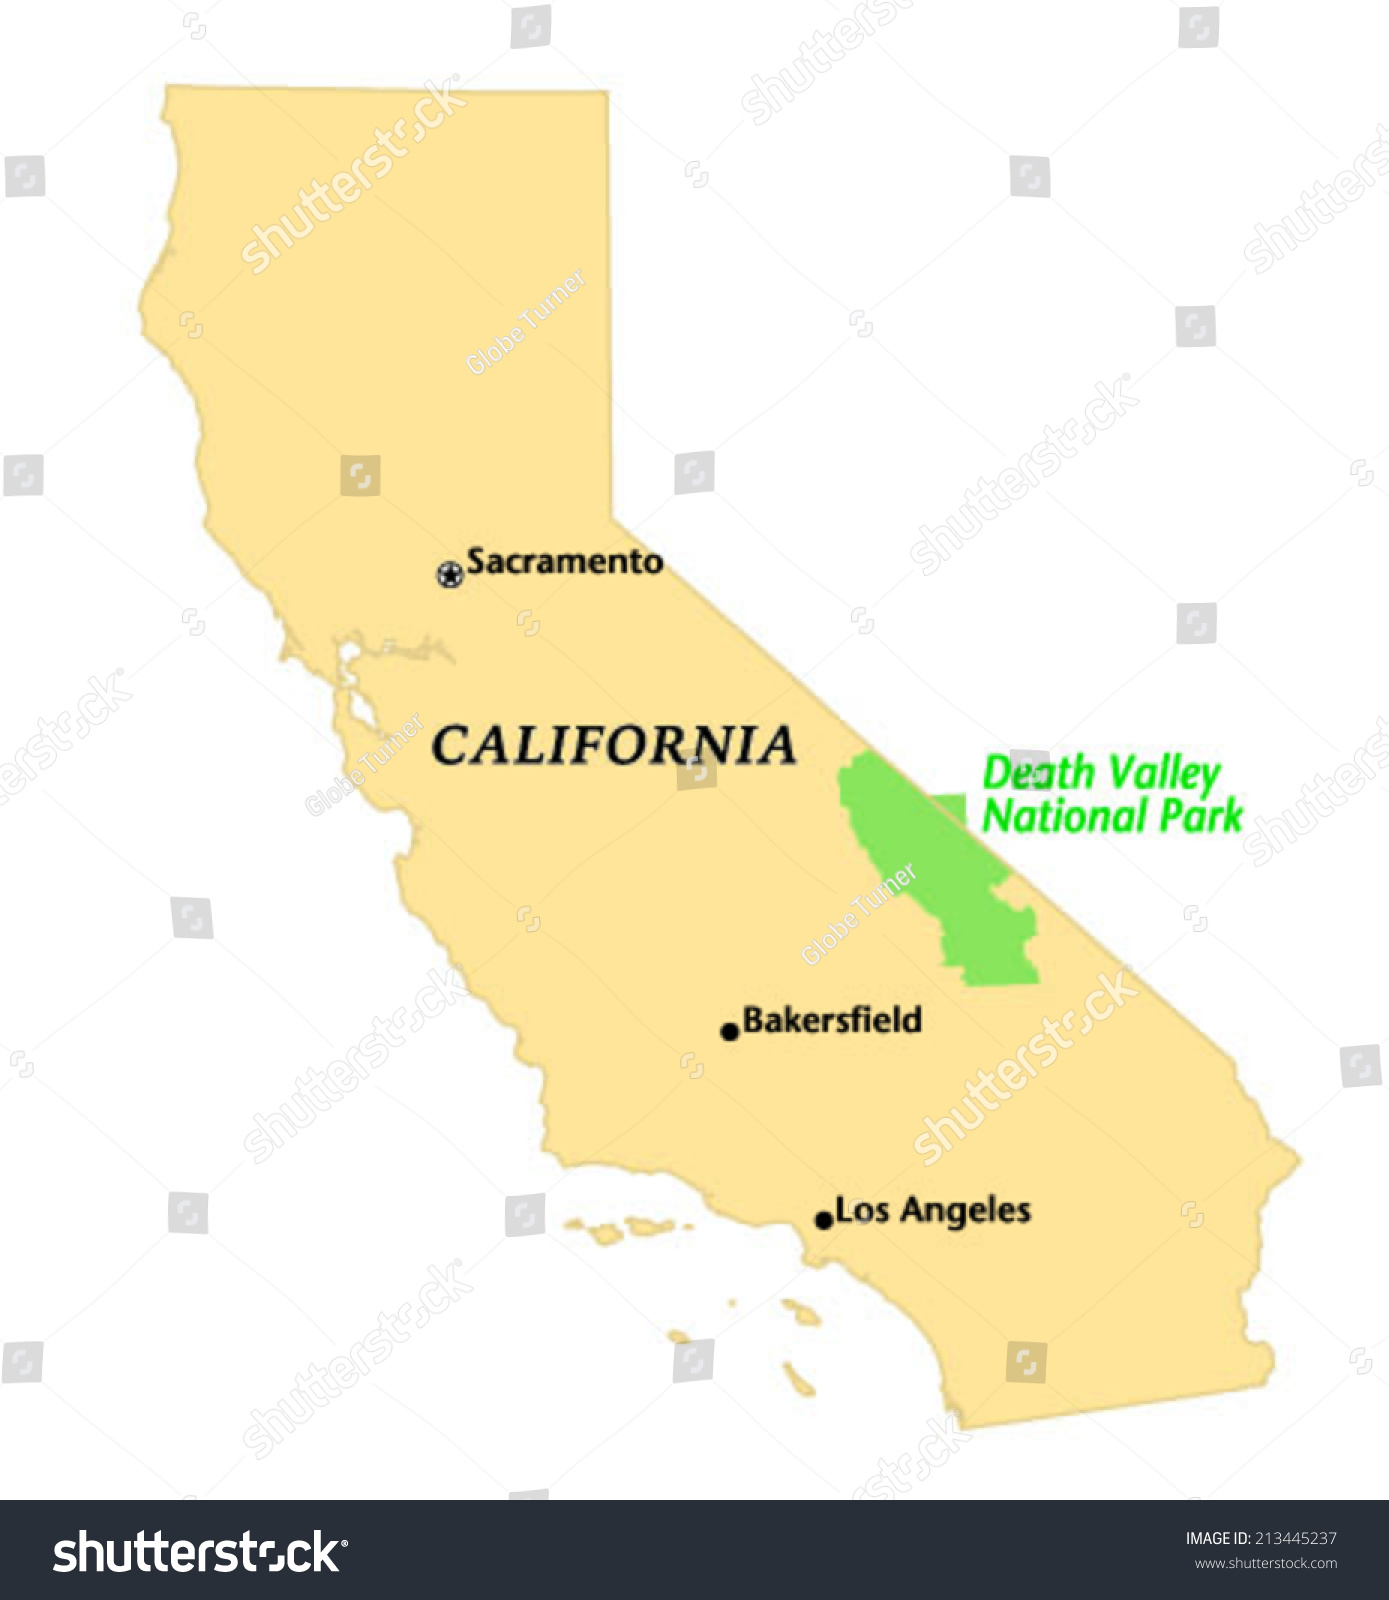 Death Valley National Park Locate Map Stock Vector Royalty Free 213445237